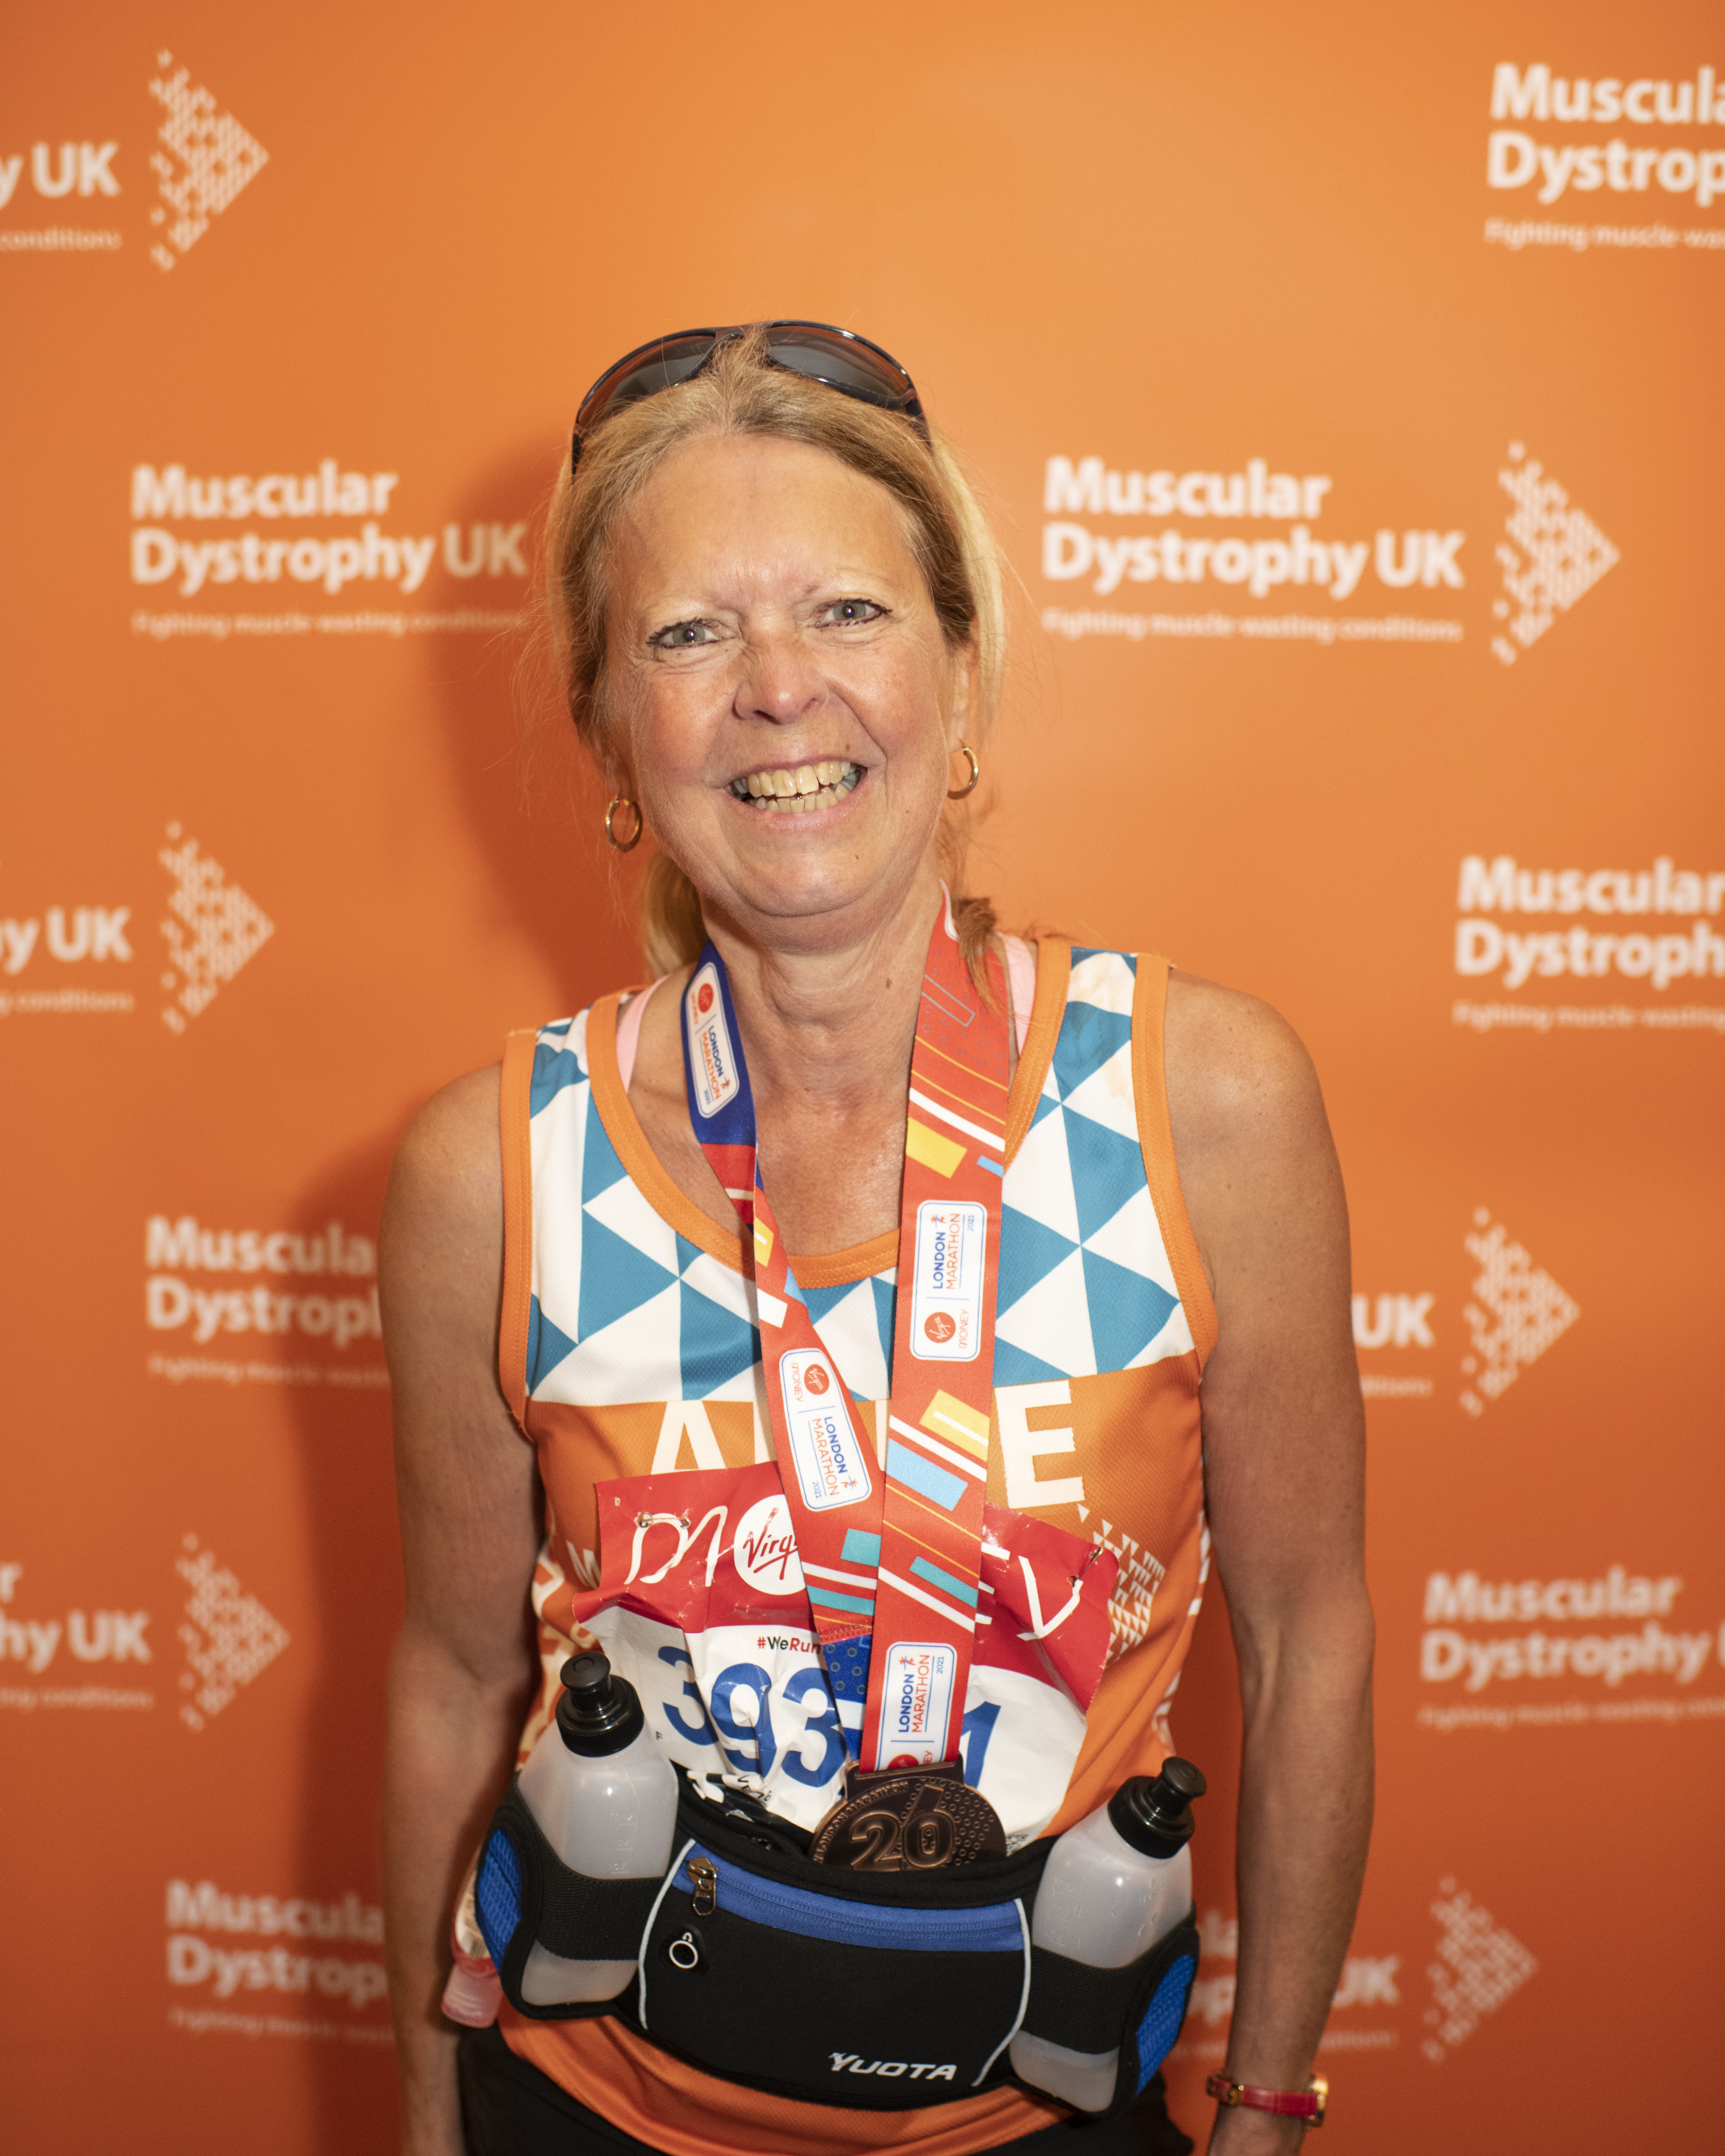 Anne Peterson is stood in her Team Orange jersey, against an MDUK backdrop after running the London Marathon